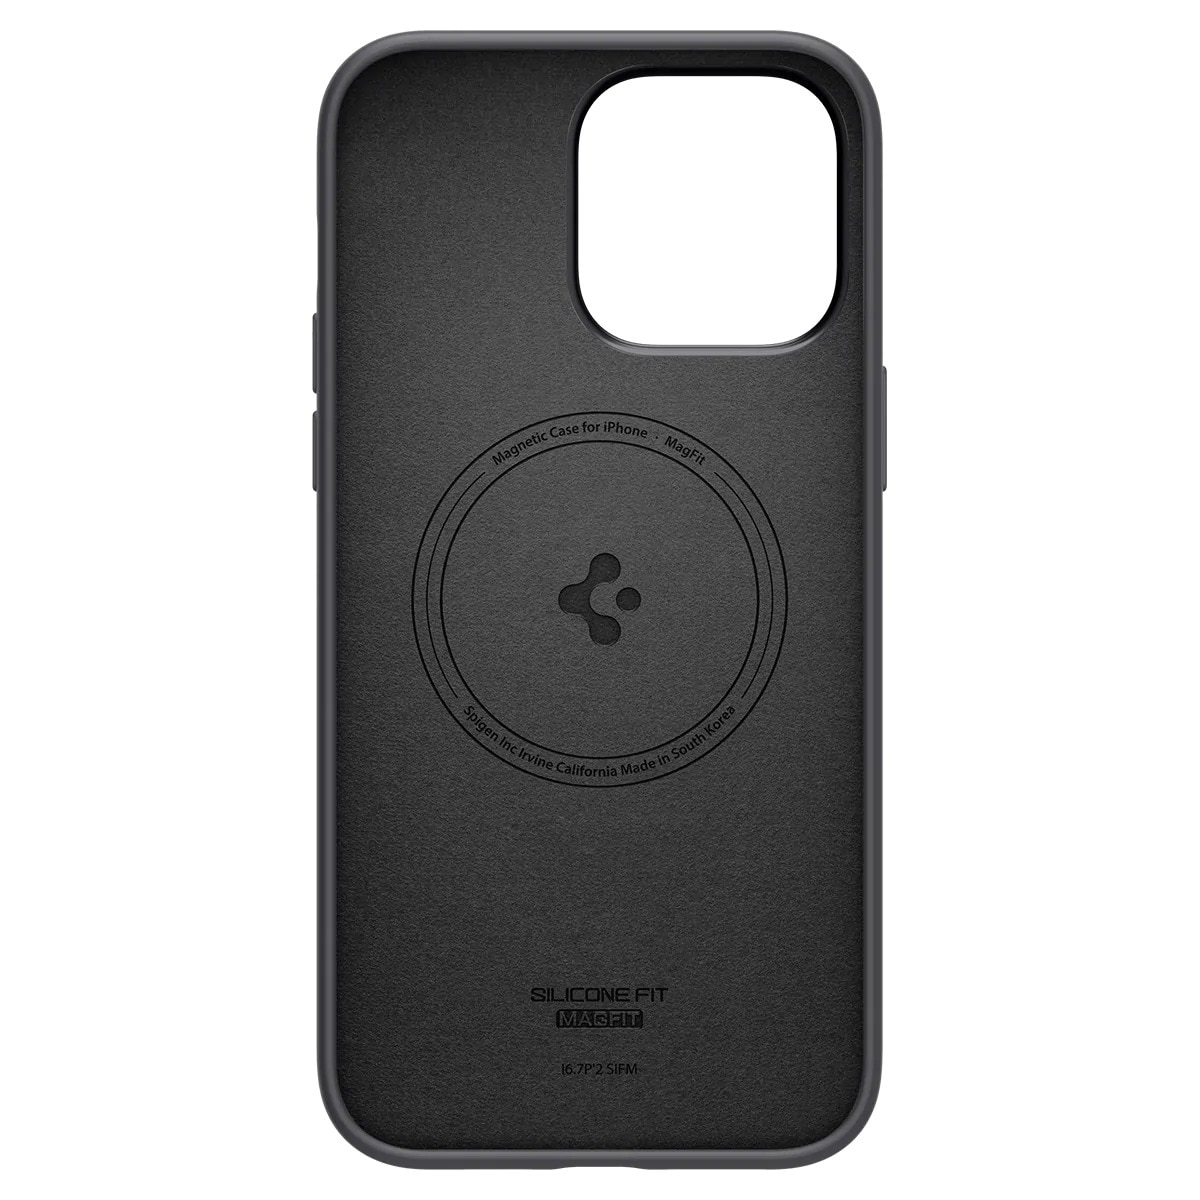 Case Silicone Fit Mag iPhone 14 Pro Black